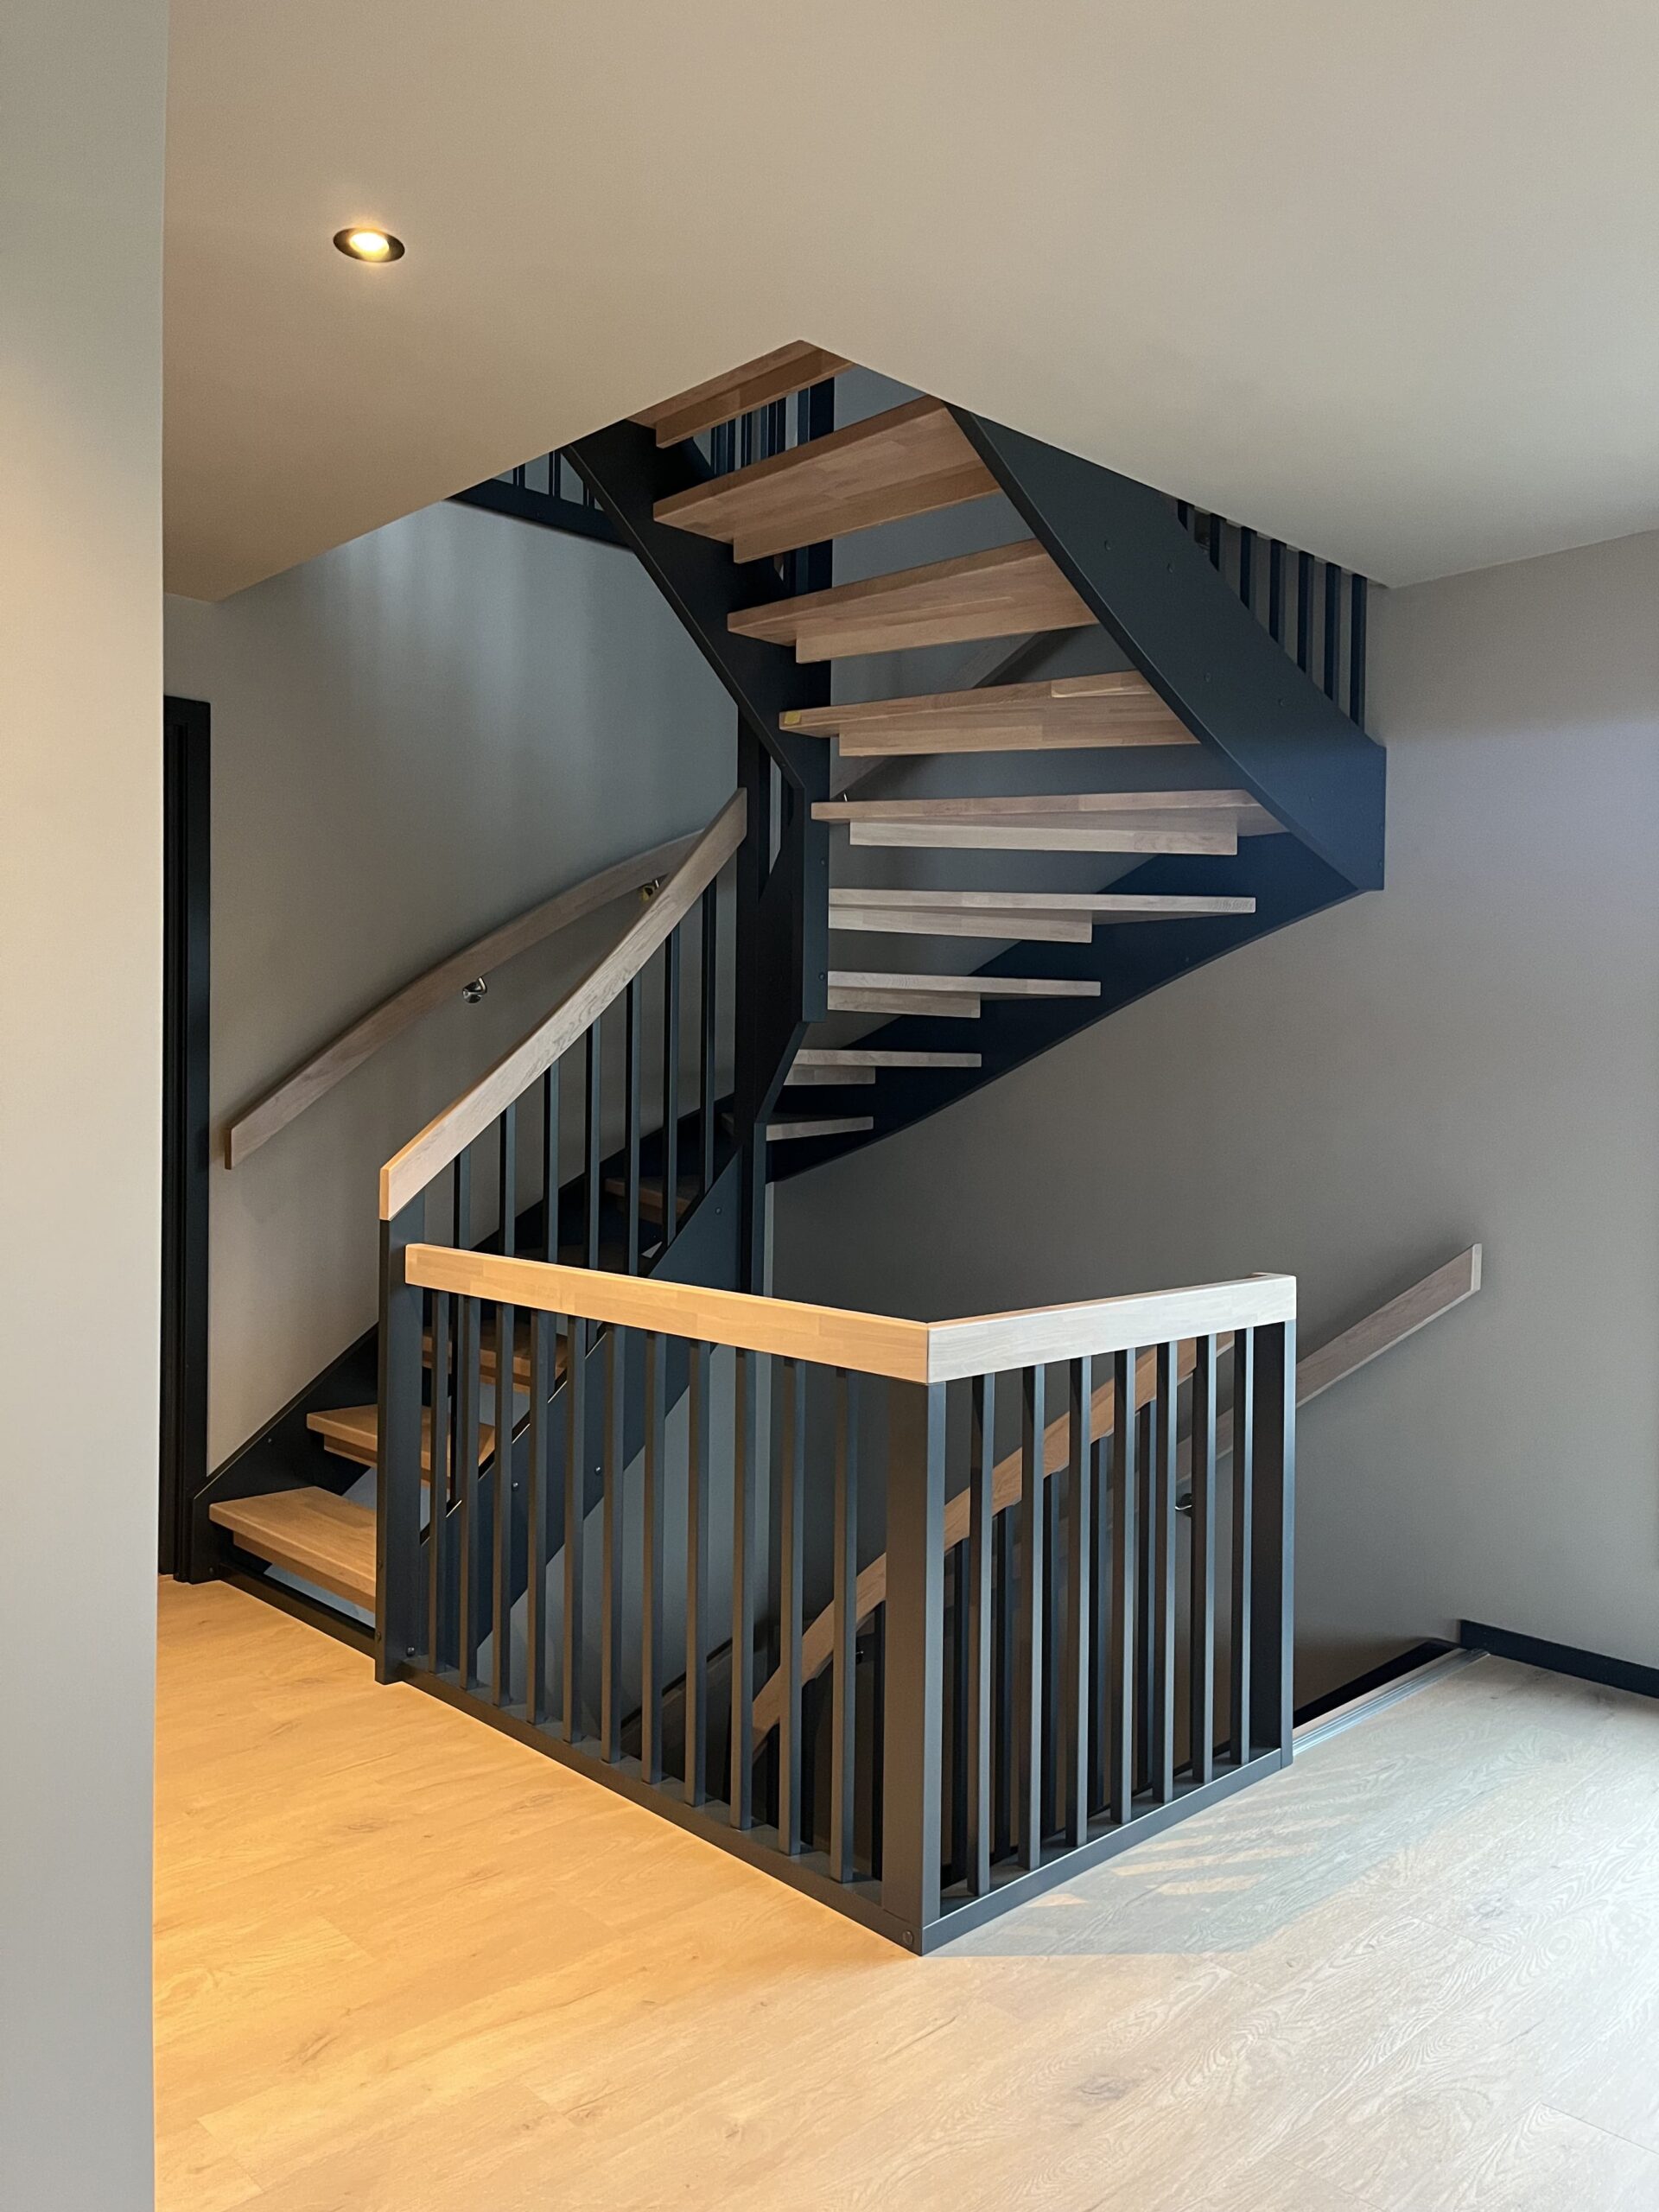 06. Black staircase with oak steps and handrails with square balusters